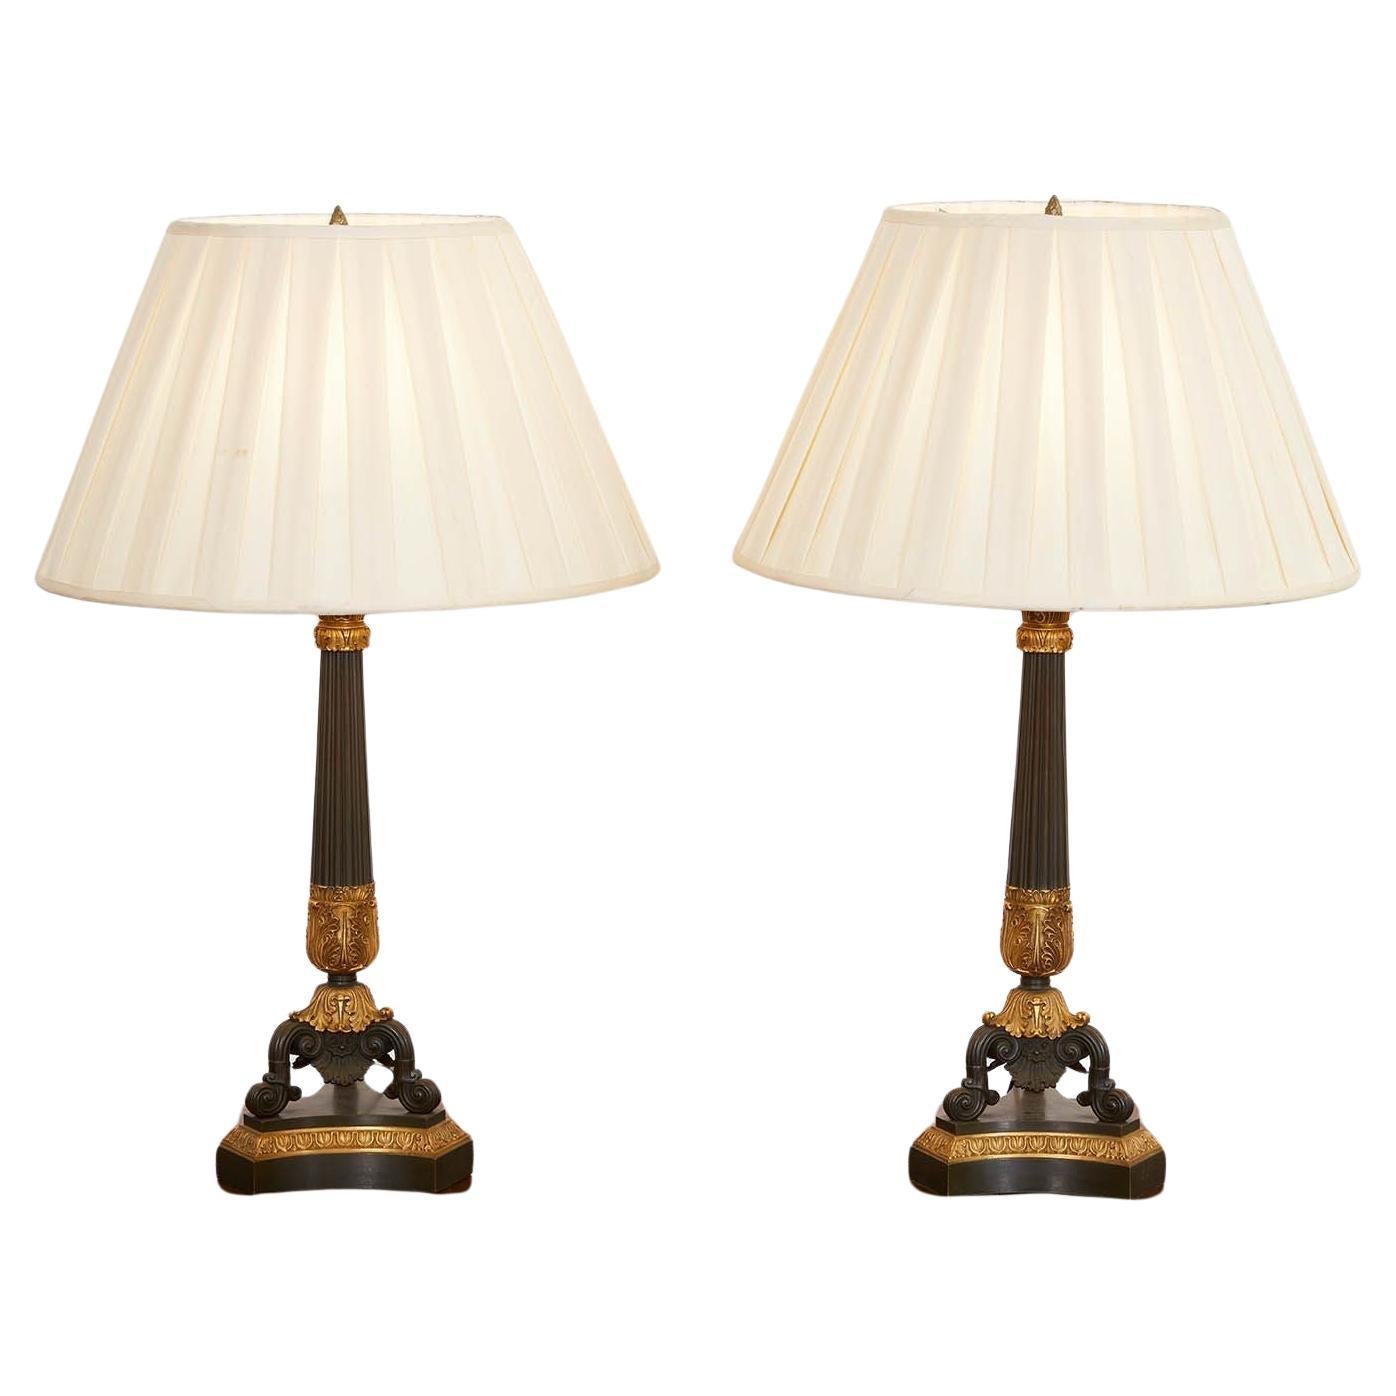 Pair of Neoclassical Bronze and Ormolu Tabletop Lamps